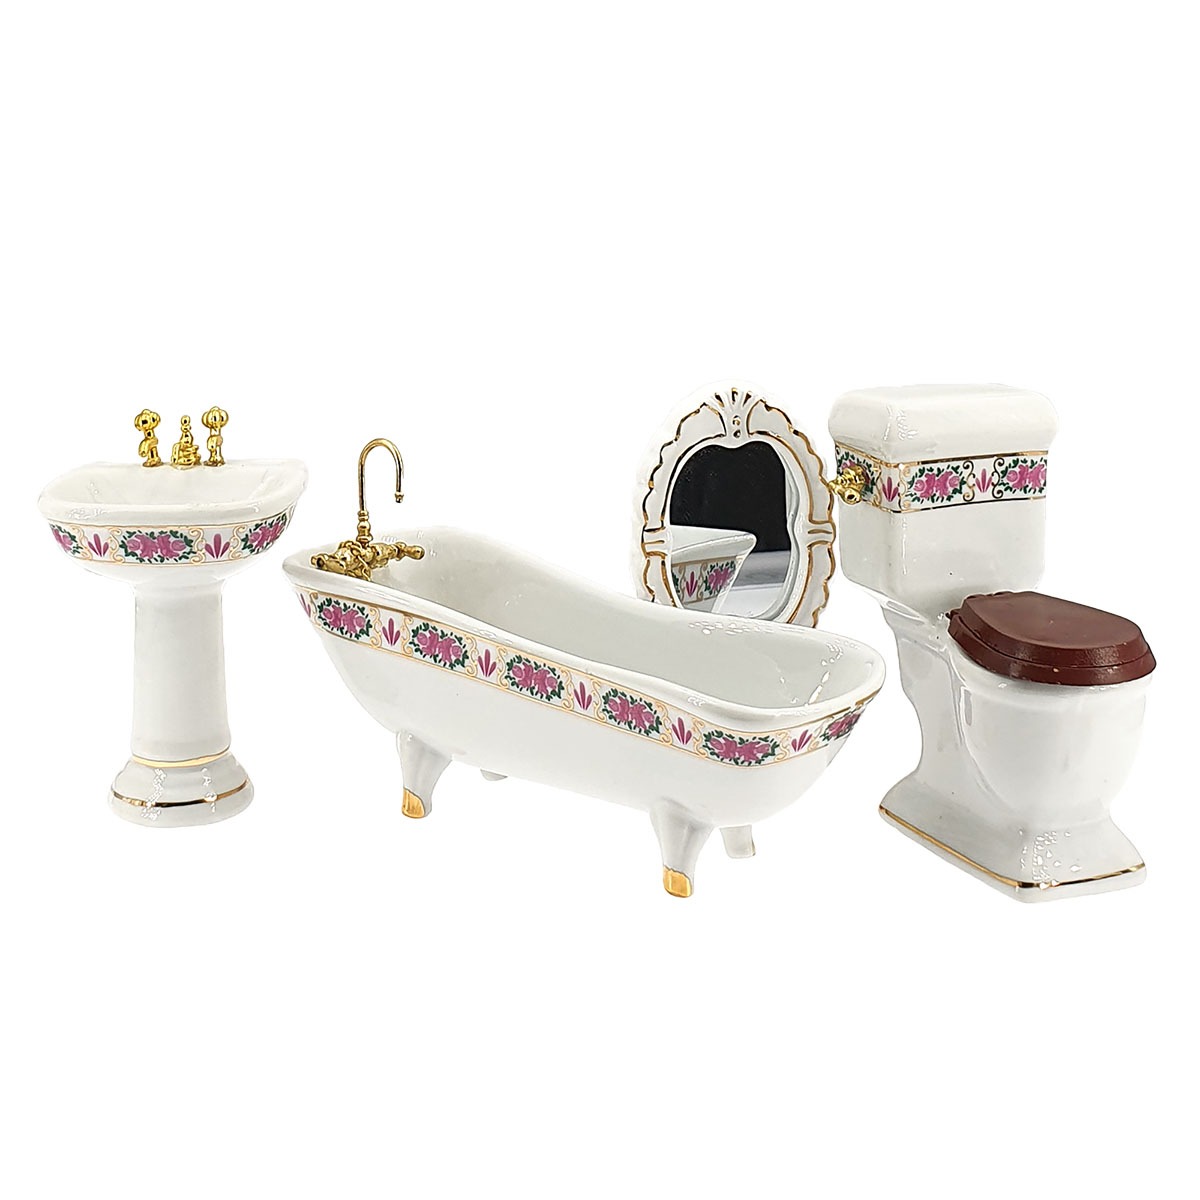 Bathroom, deluxe, porcelain, white, with décor 4 pcs.  バスルームセット（フラワー・ピンク）